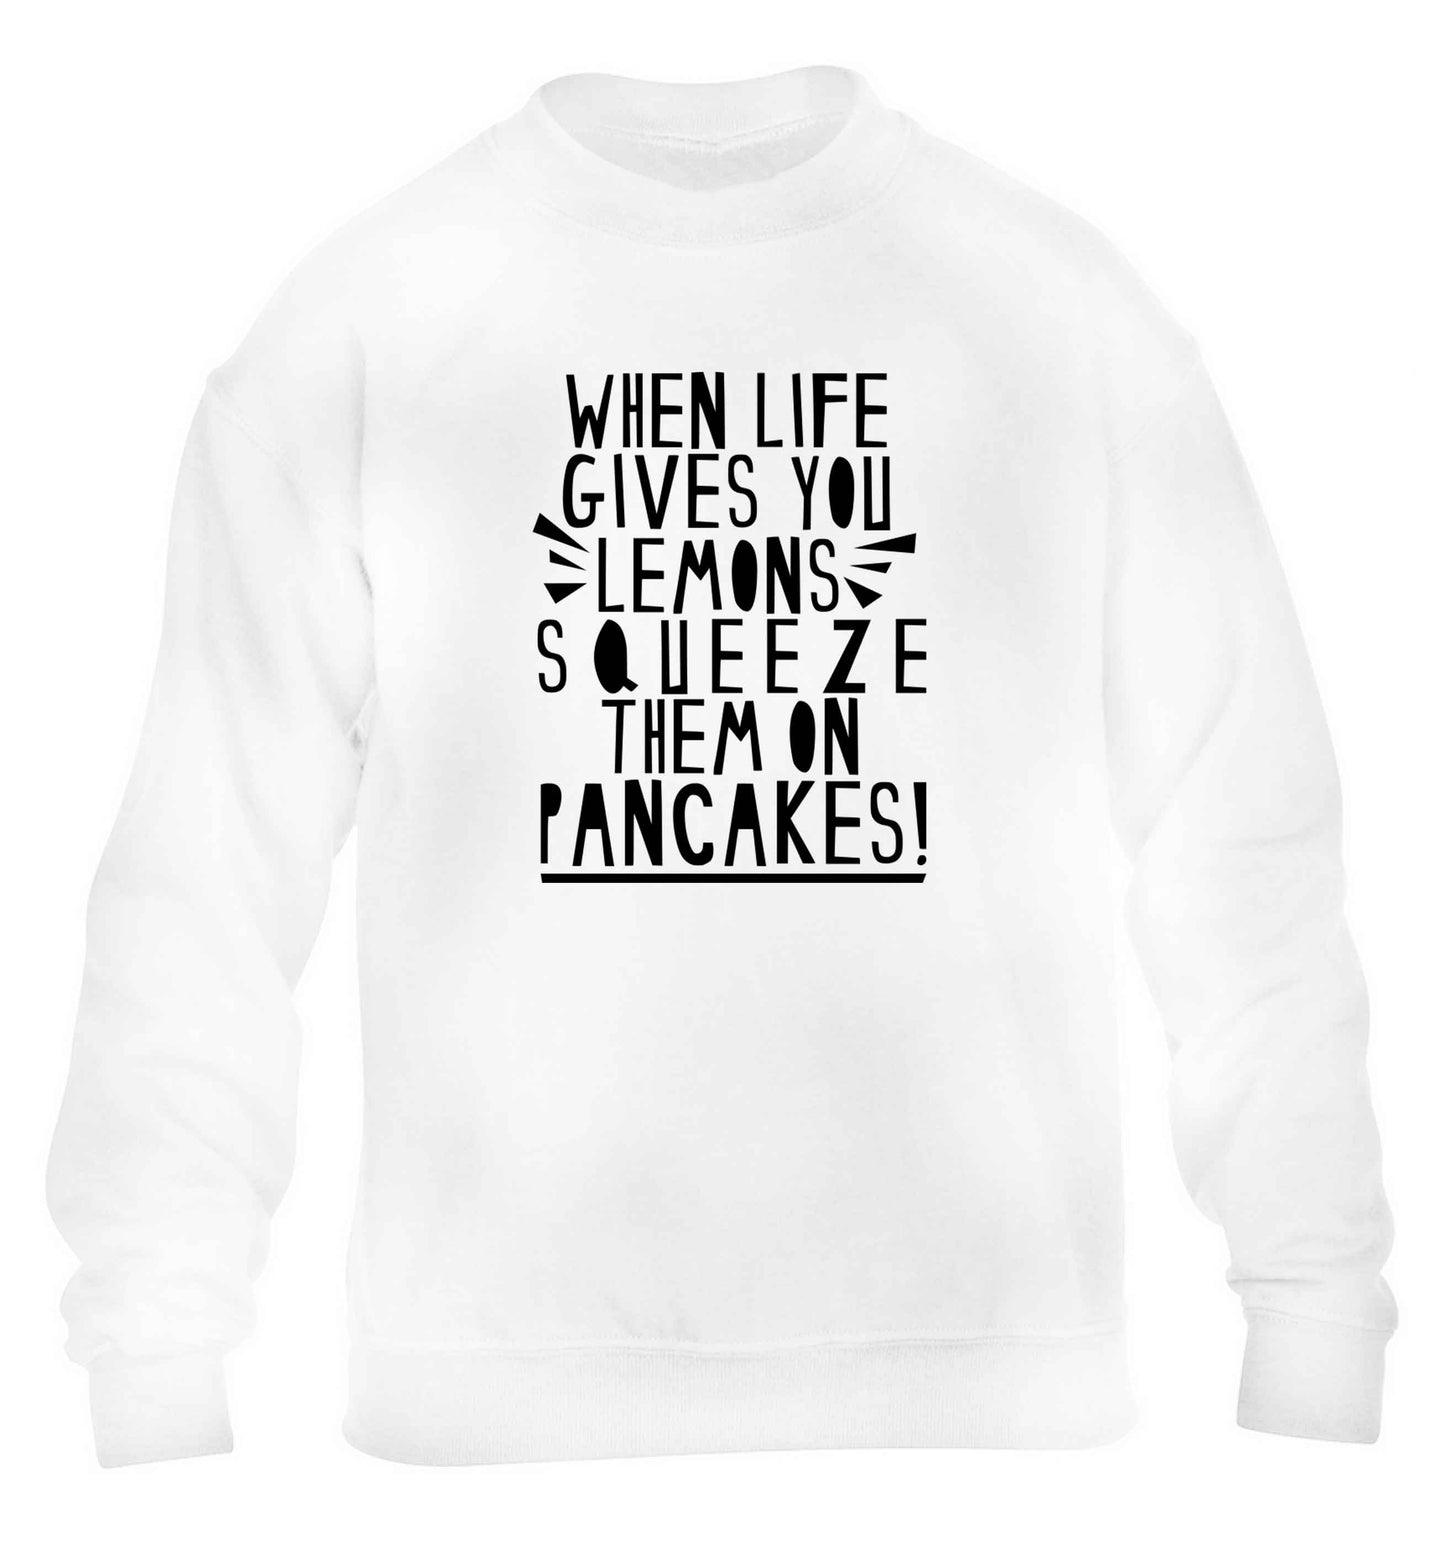 When life gives you lemons squeeze them on pancakes! children's white sweater 12-13 Years